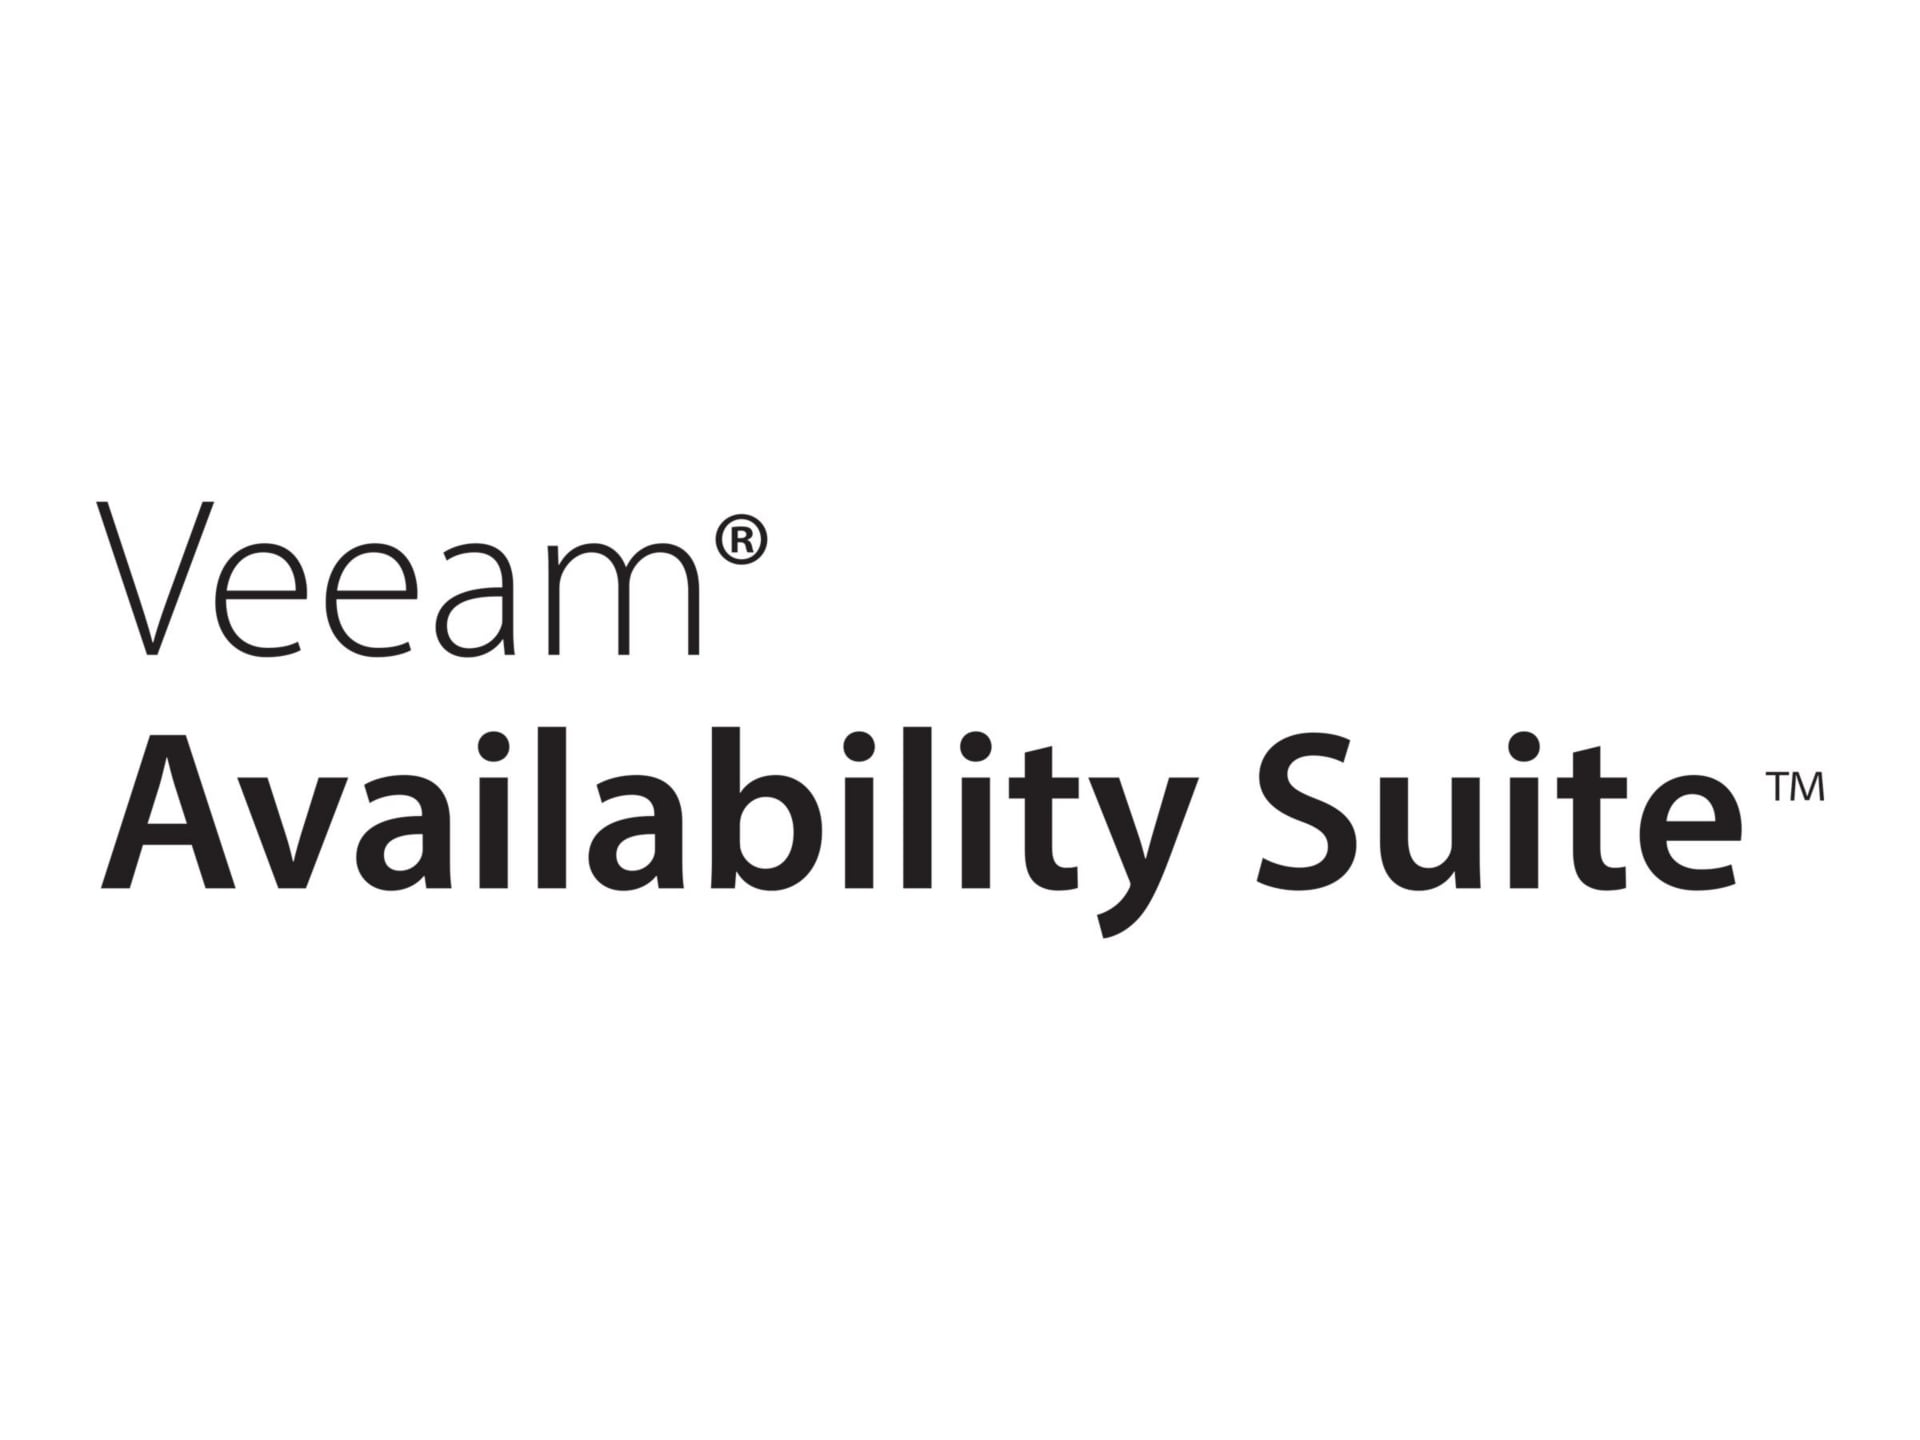 Veeam Availability Suite Universal License - Upfront Billing License (1 month) + Production Support - 1 TB increments